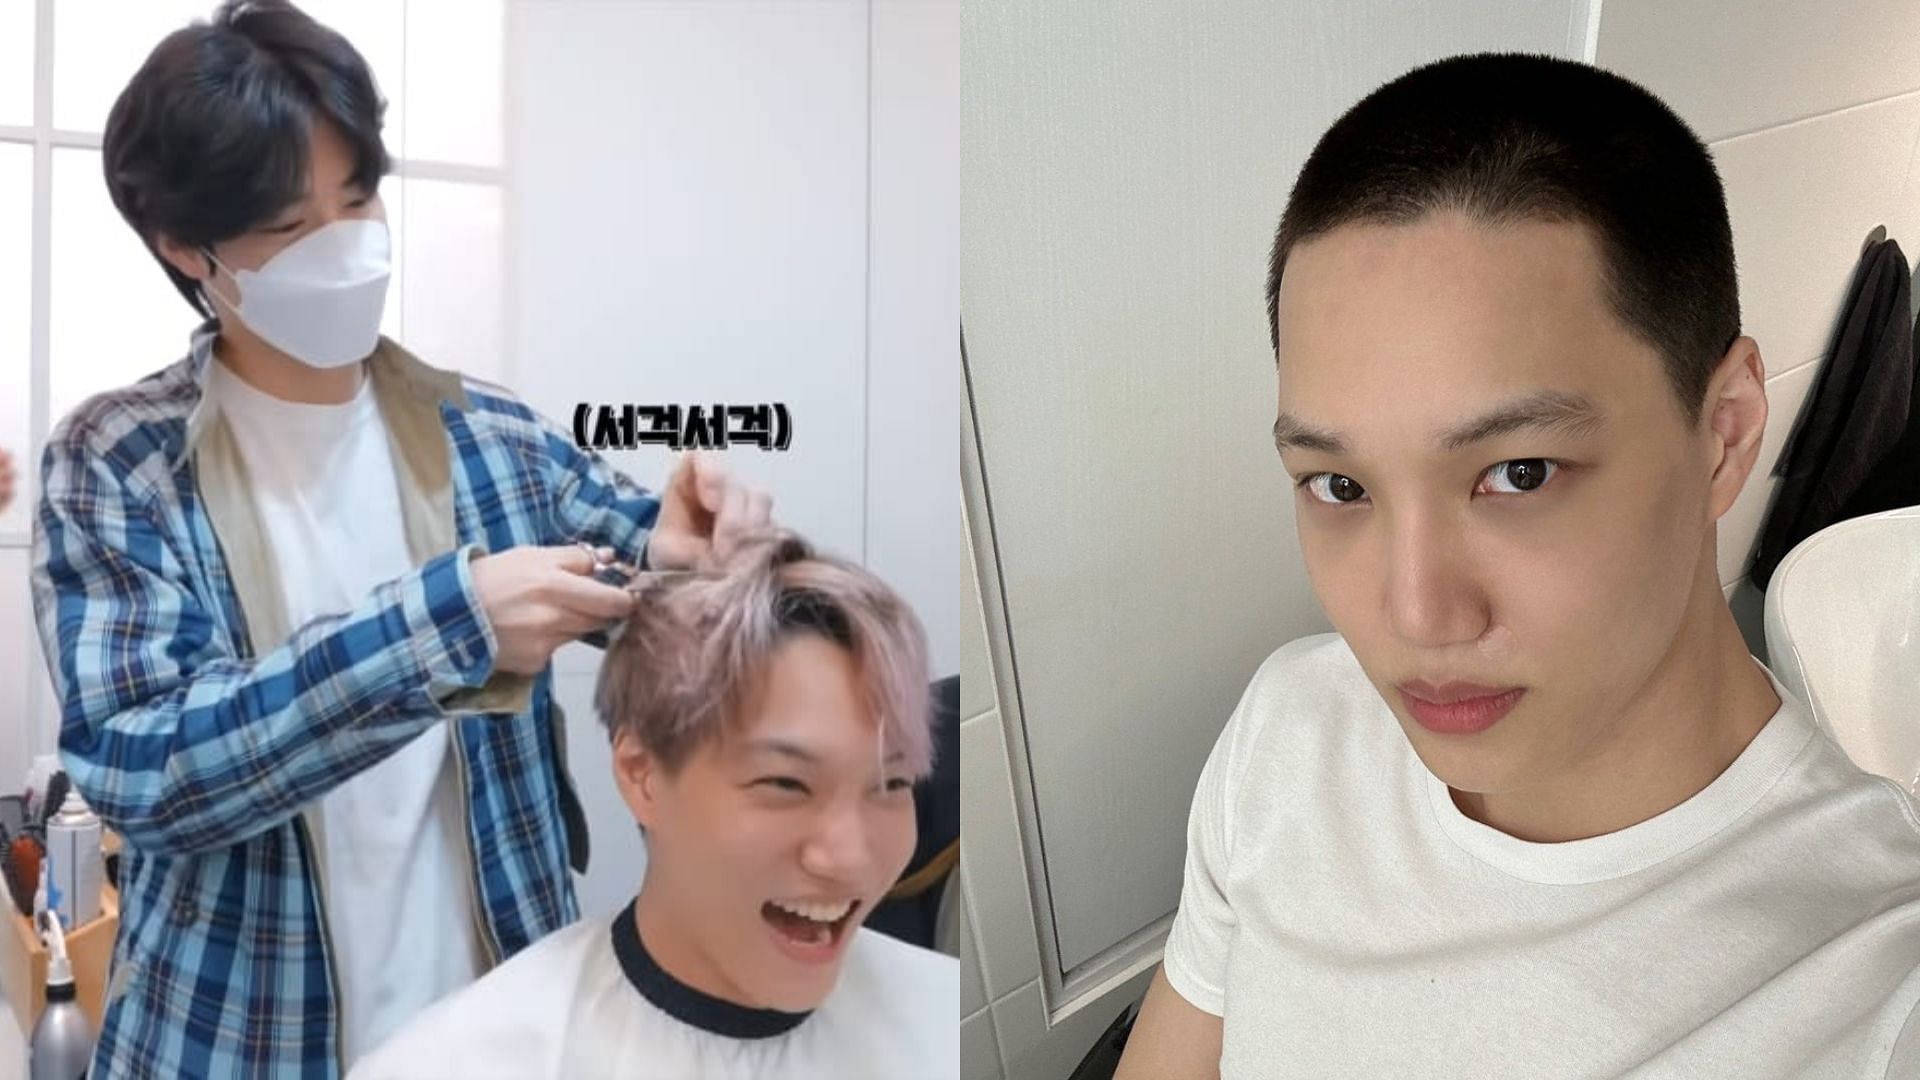 EXO drops vlog of member Kai getting a buzz cut before enlisting in the military. (Images via YouTube/EXO and Twitter/kokokbop)